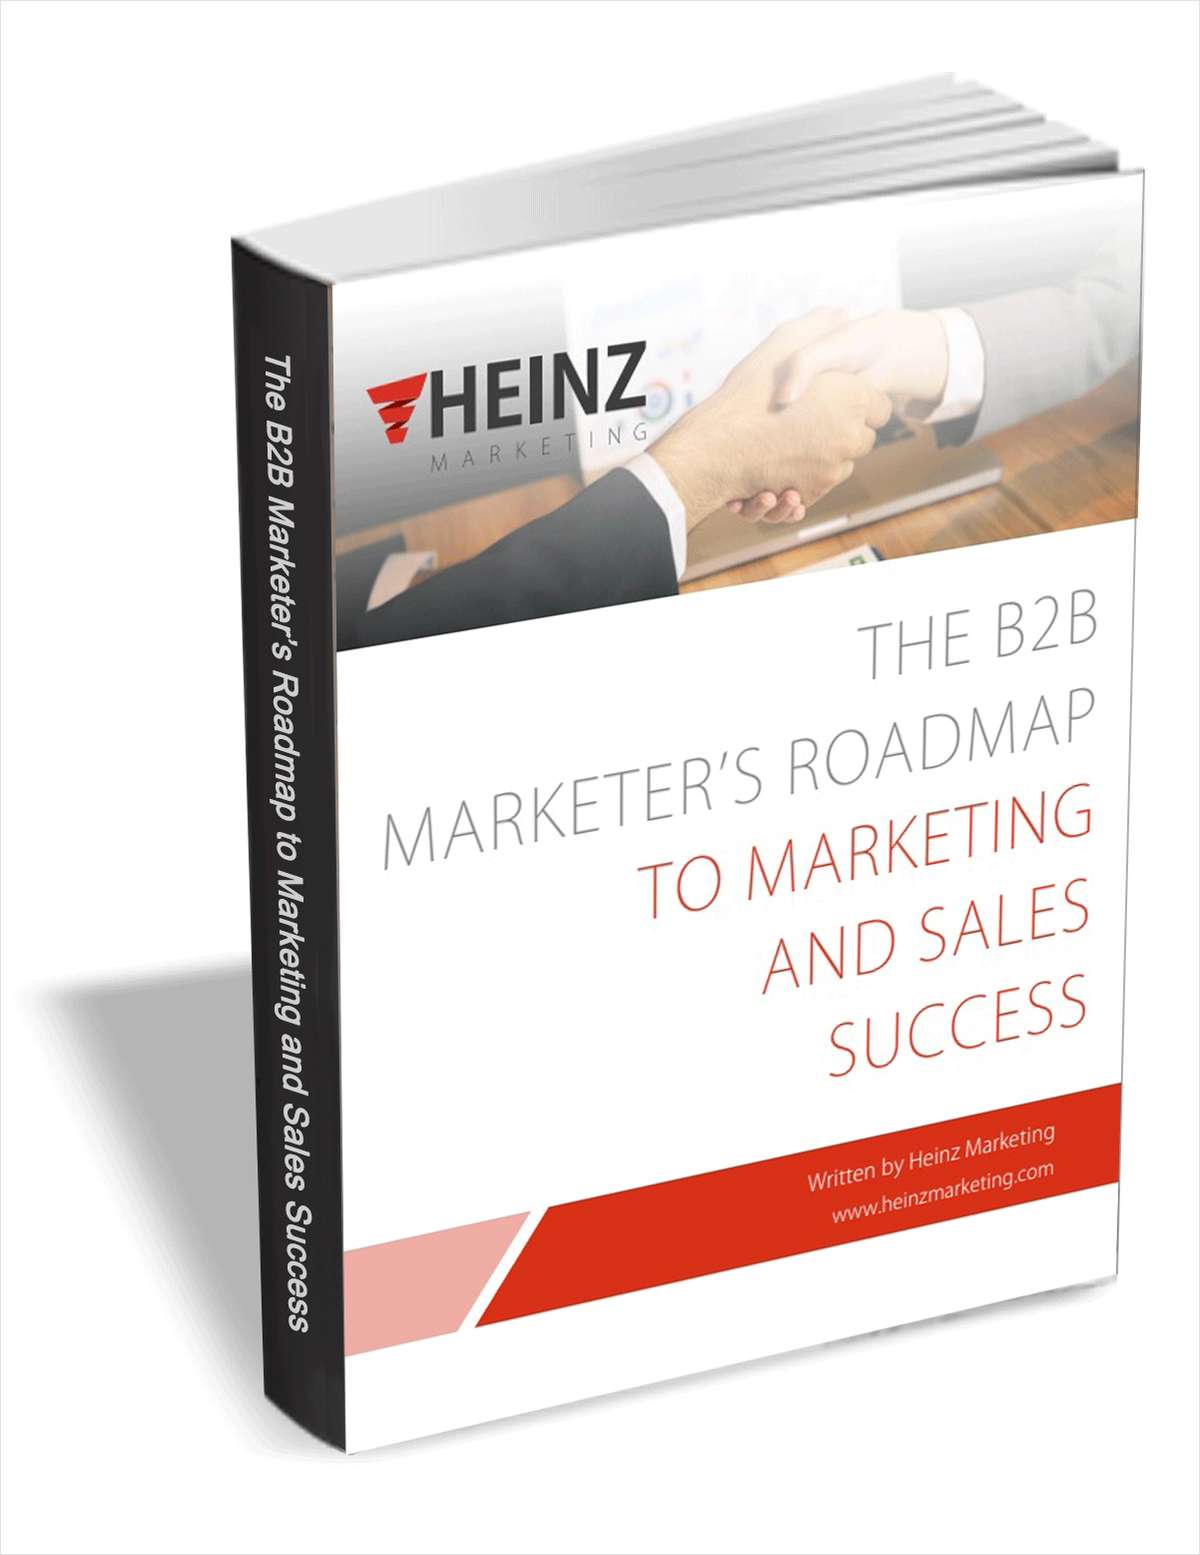 The B2B Marketer's Roadmap to Marketing and Sales Success